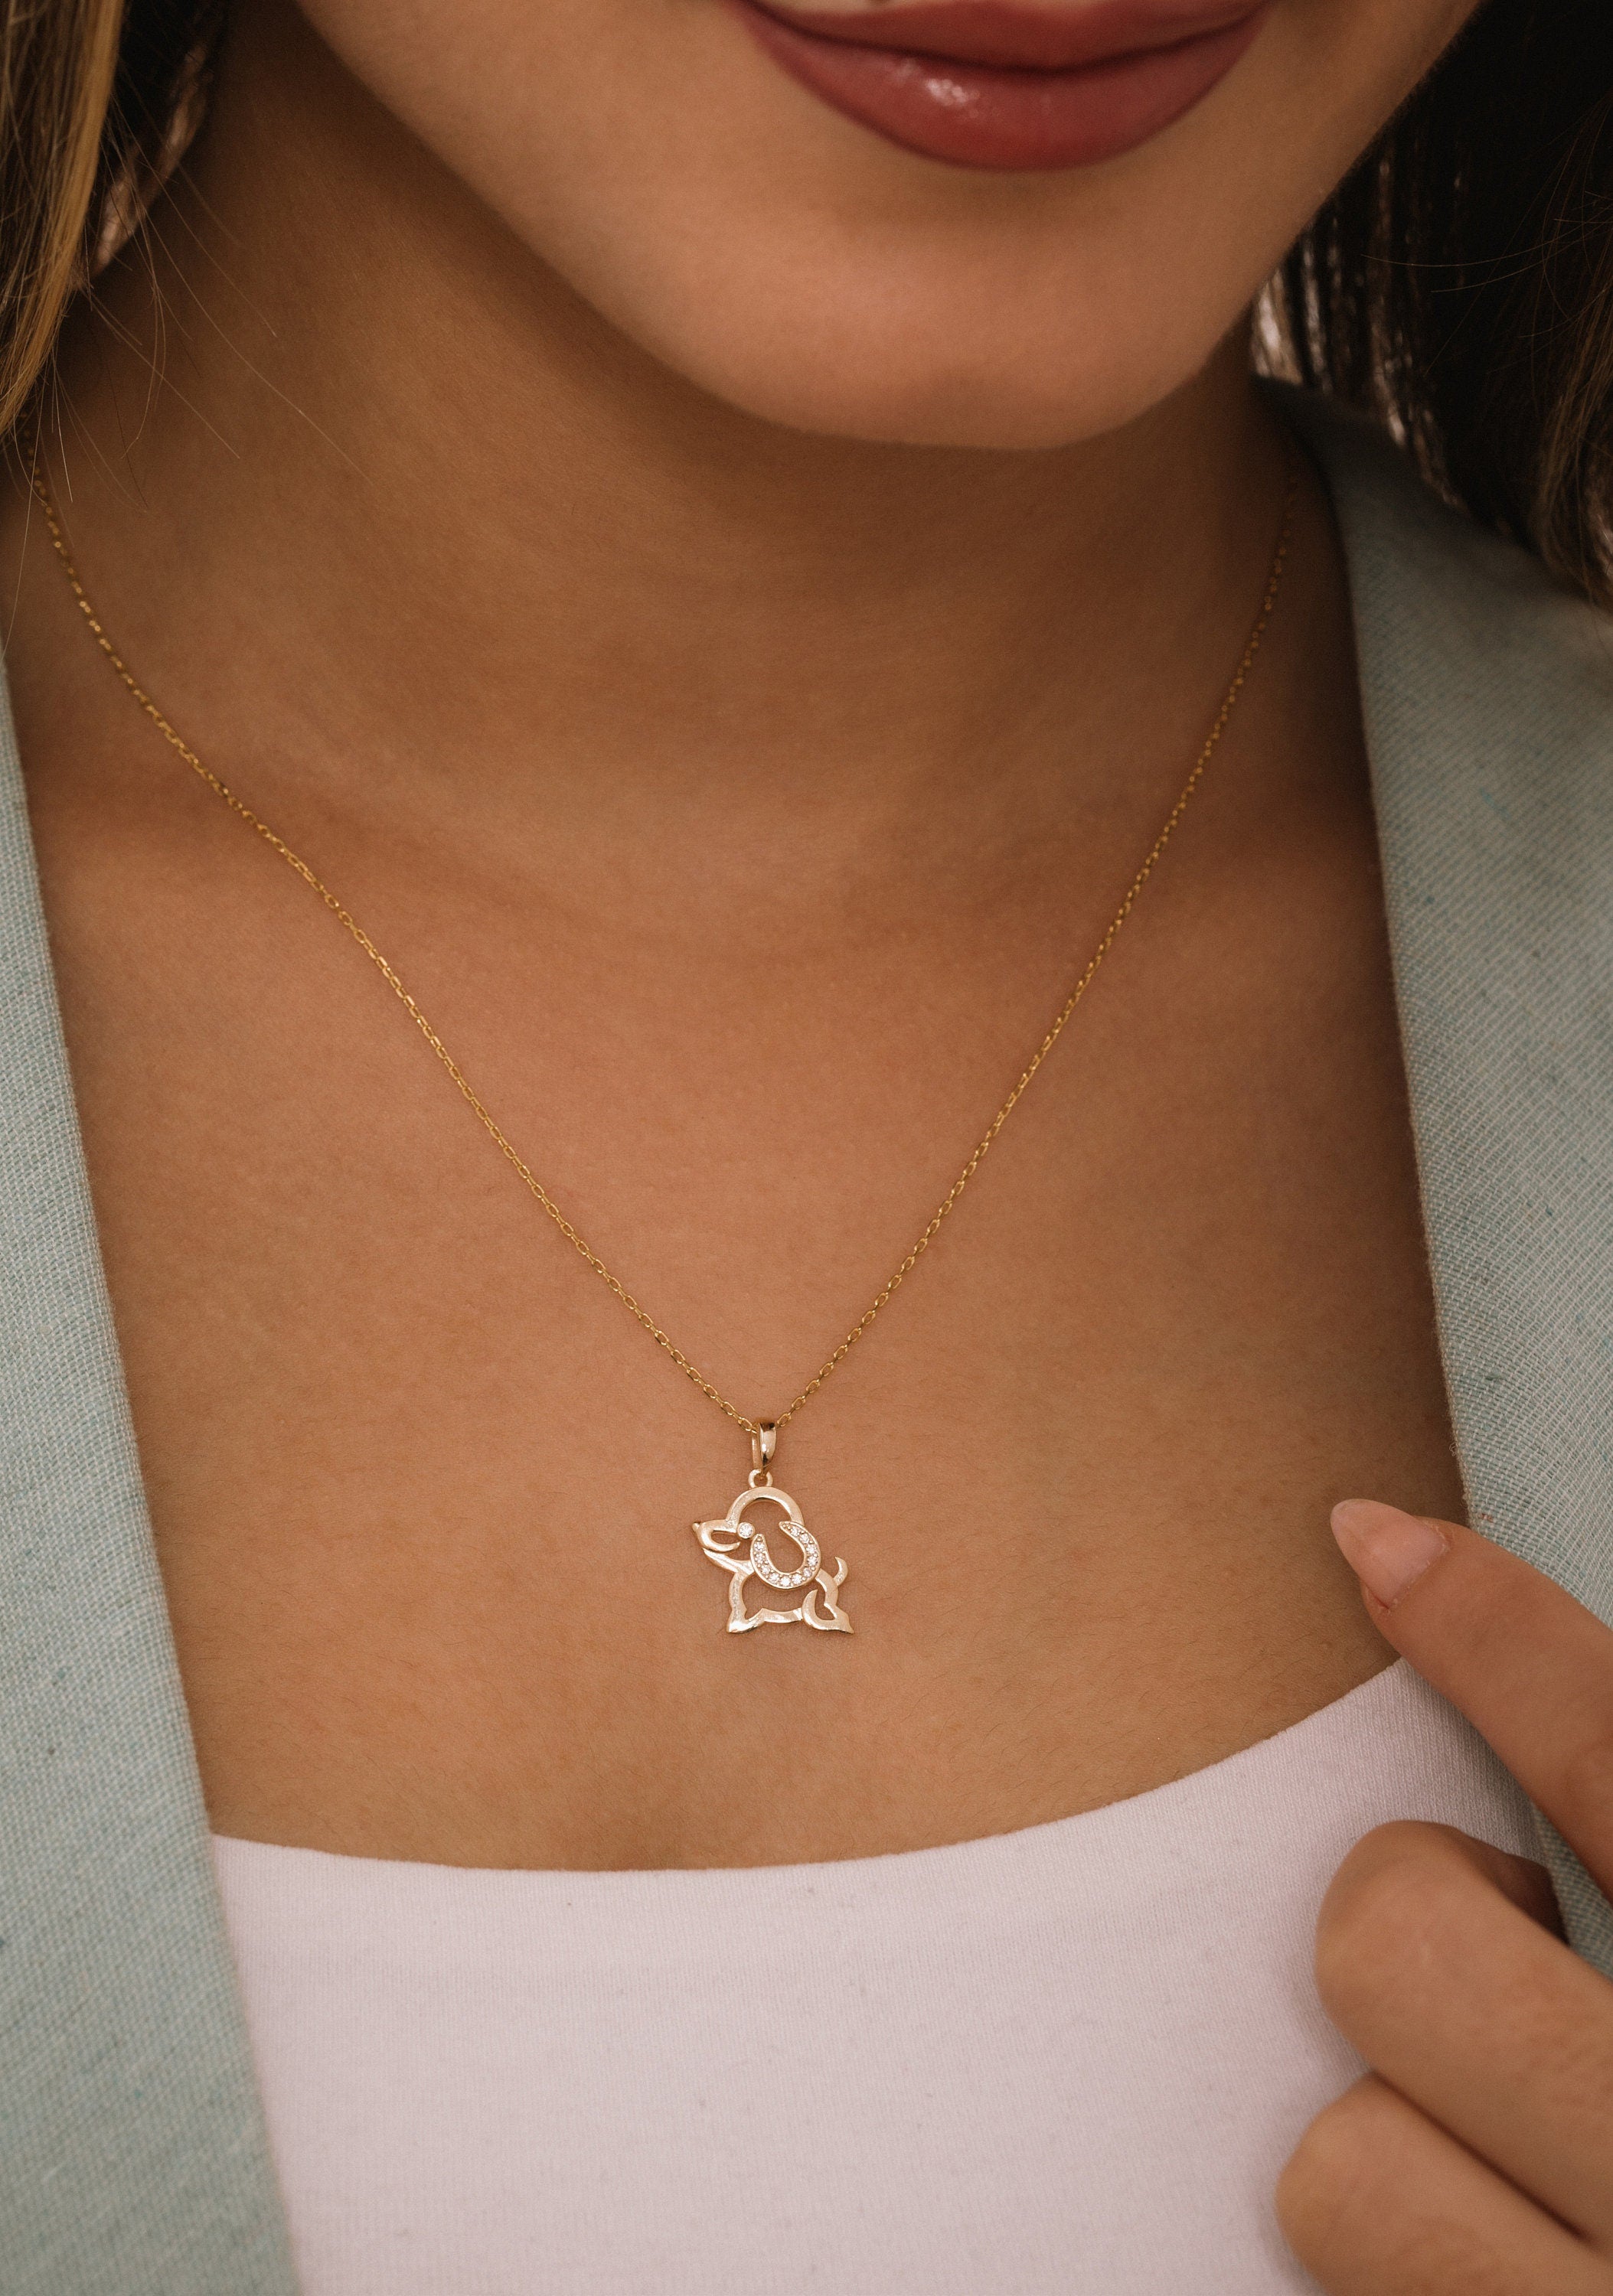 Adorable 14K Gold Puppy Dog Charm Necklace, Animal Lovers Jewelry, Tiny Dog Pendant Necklace, 925 Silver Pet Necklace, Cute Pet Gift